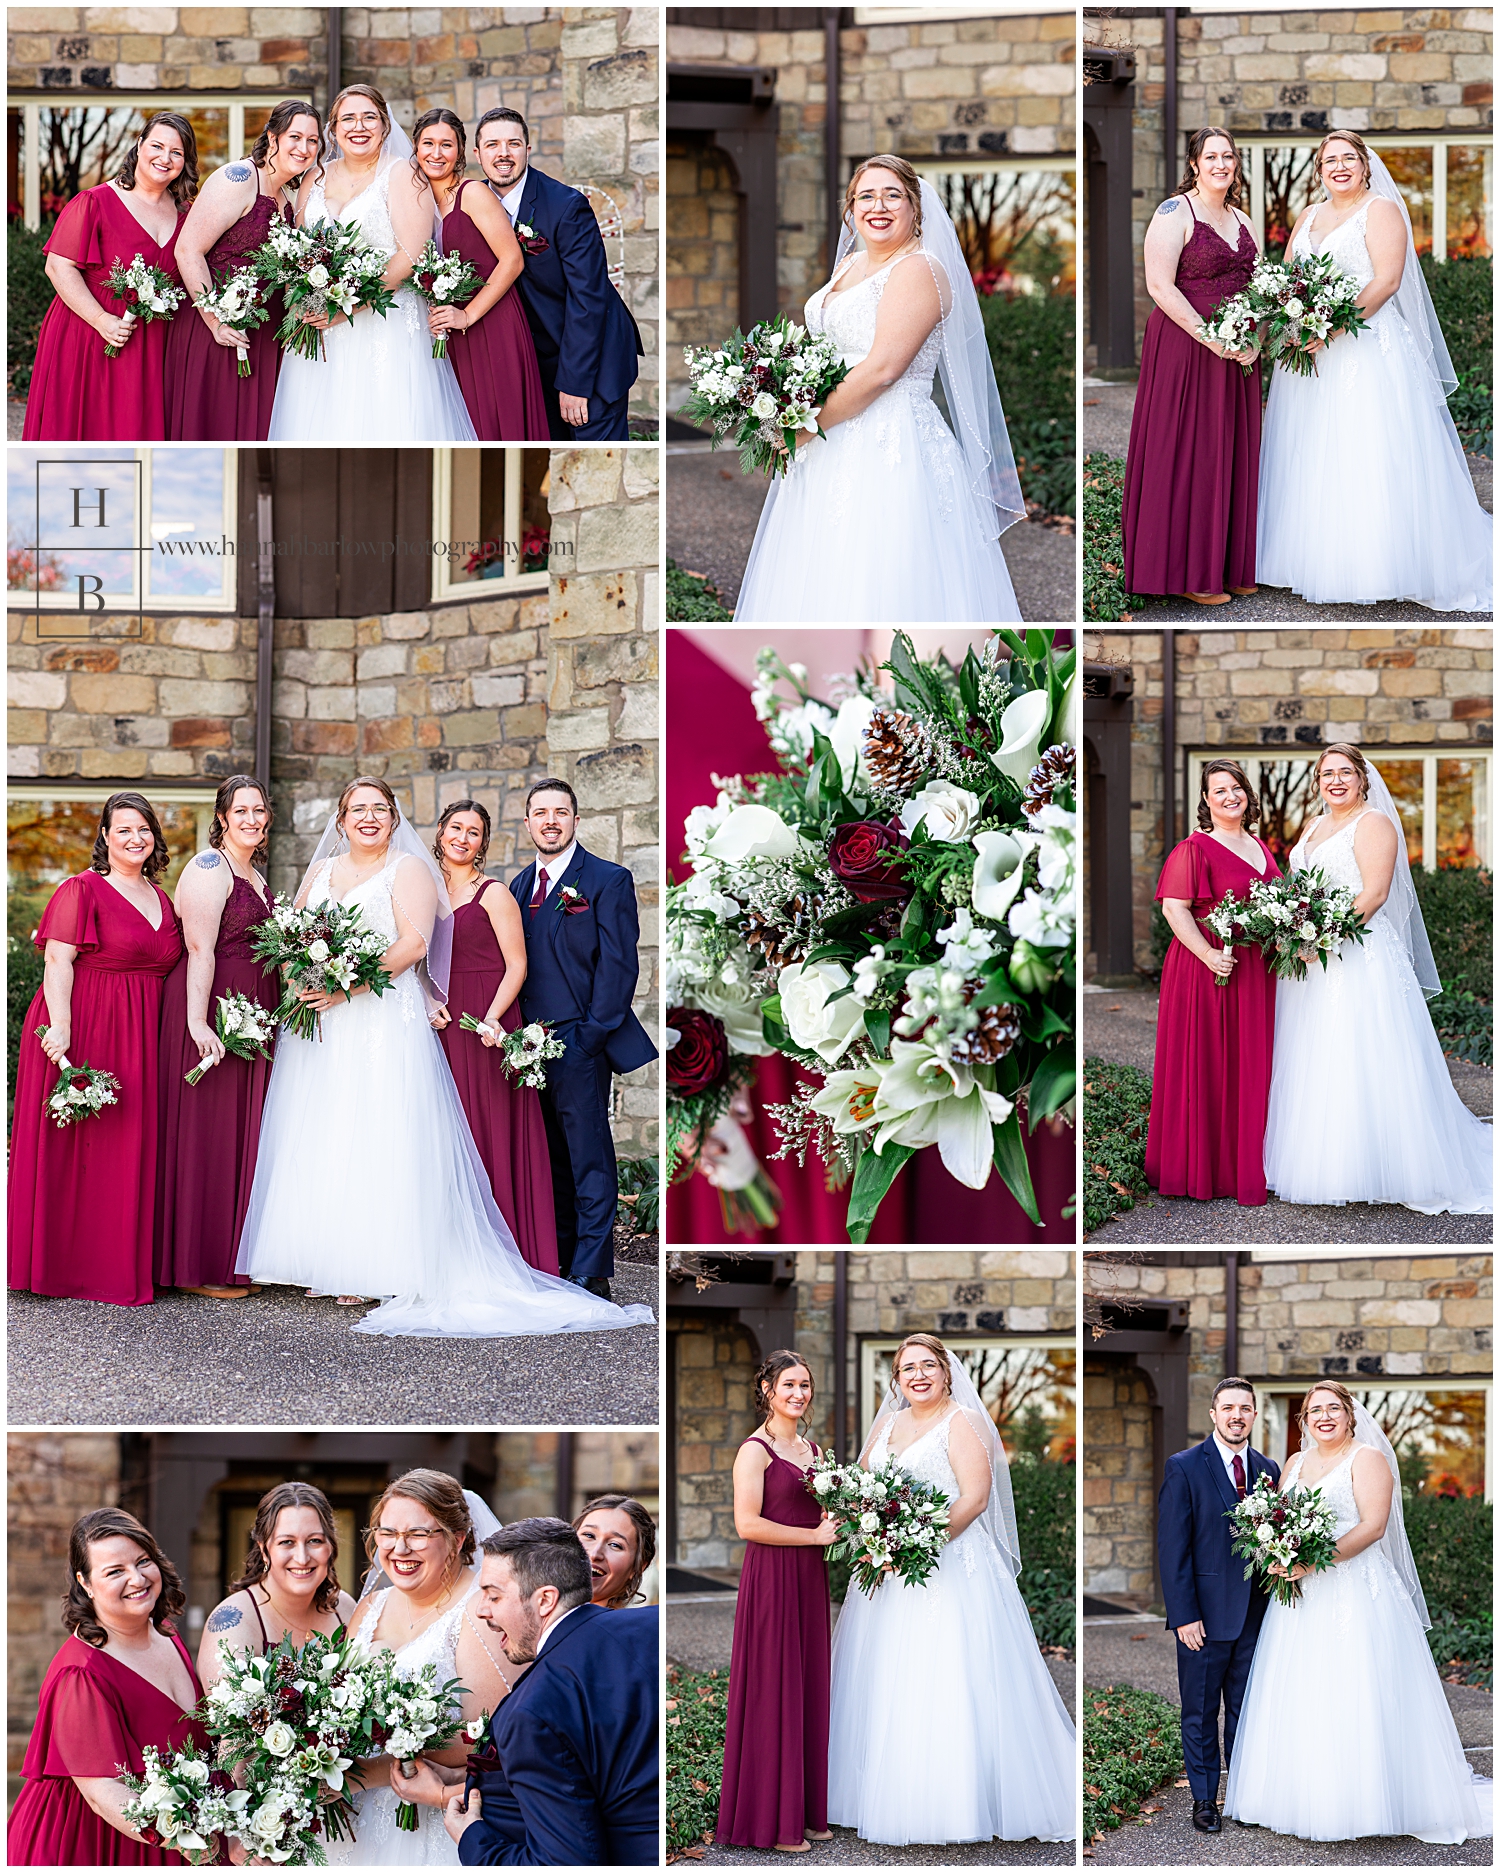 Burgundy and navy wedding party photos on the bride's side